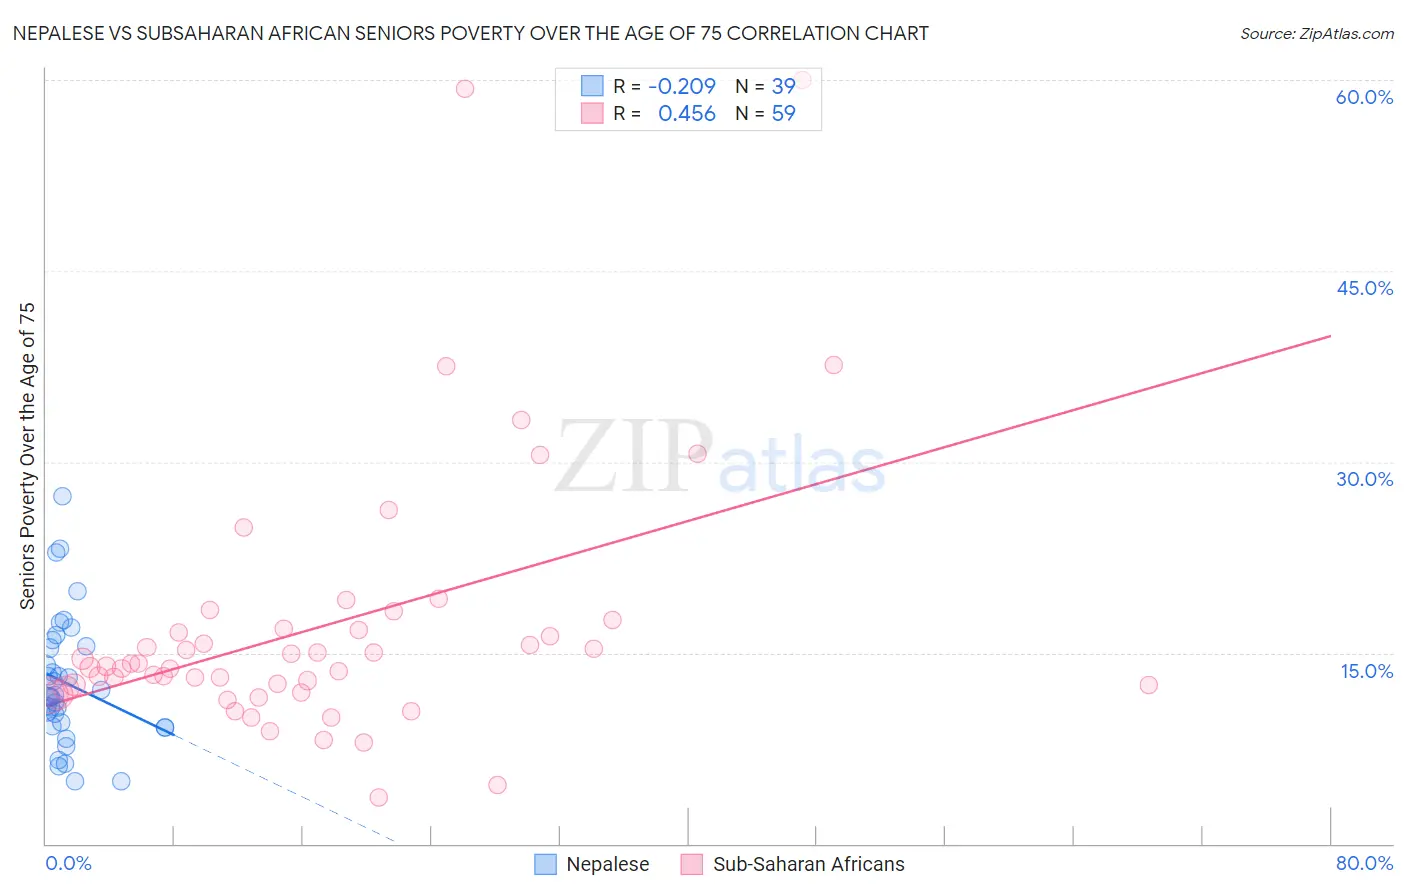 Nepalese vs Subsaharan African Seniors Poverty Over the Age of 75